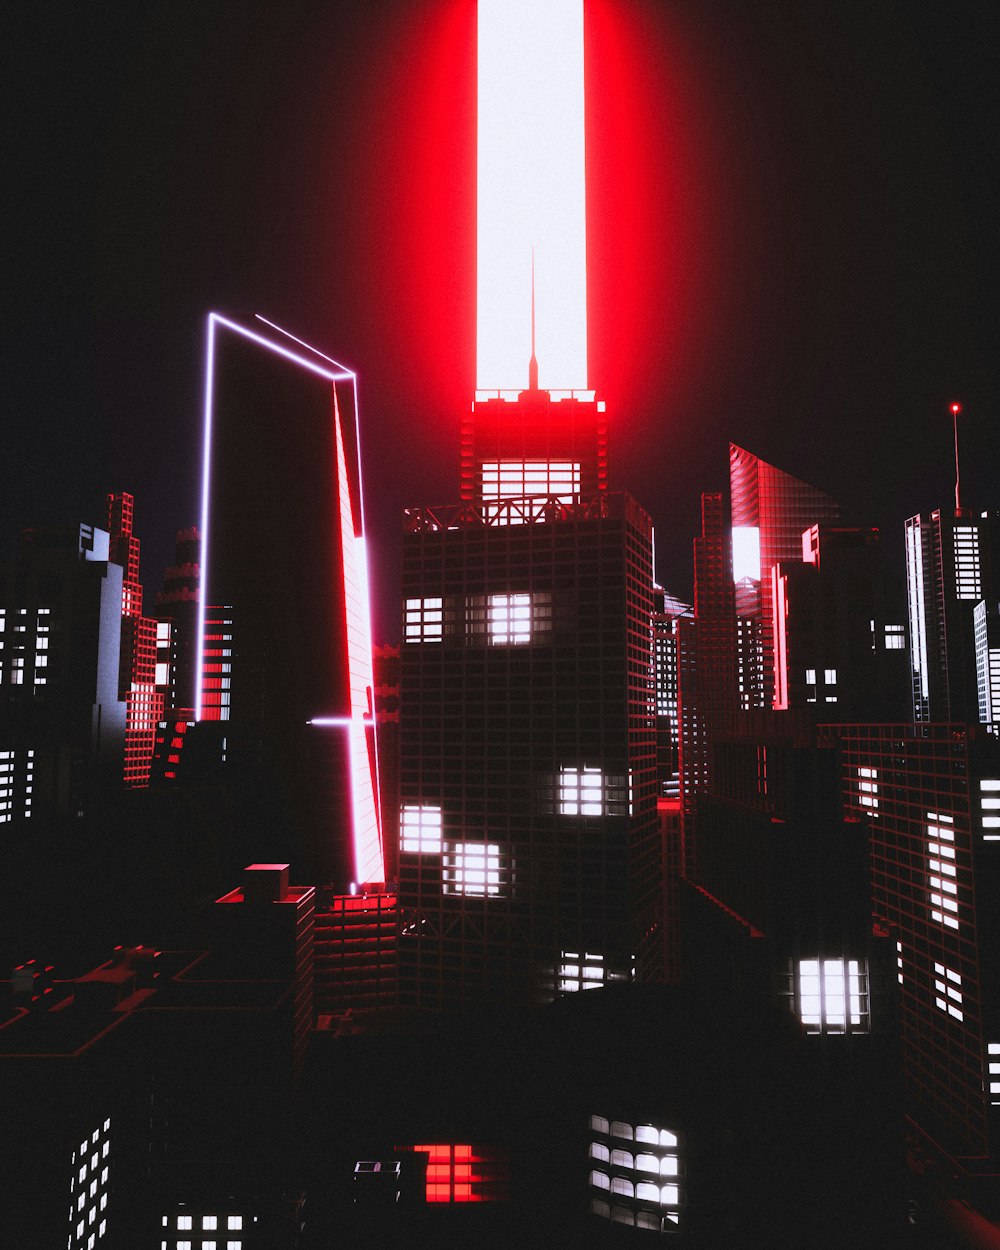 a red and white light shines on a city at night